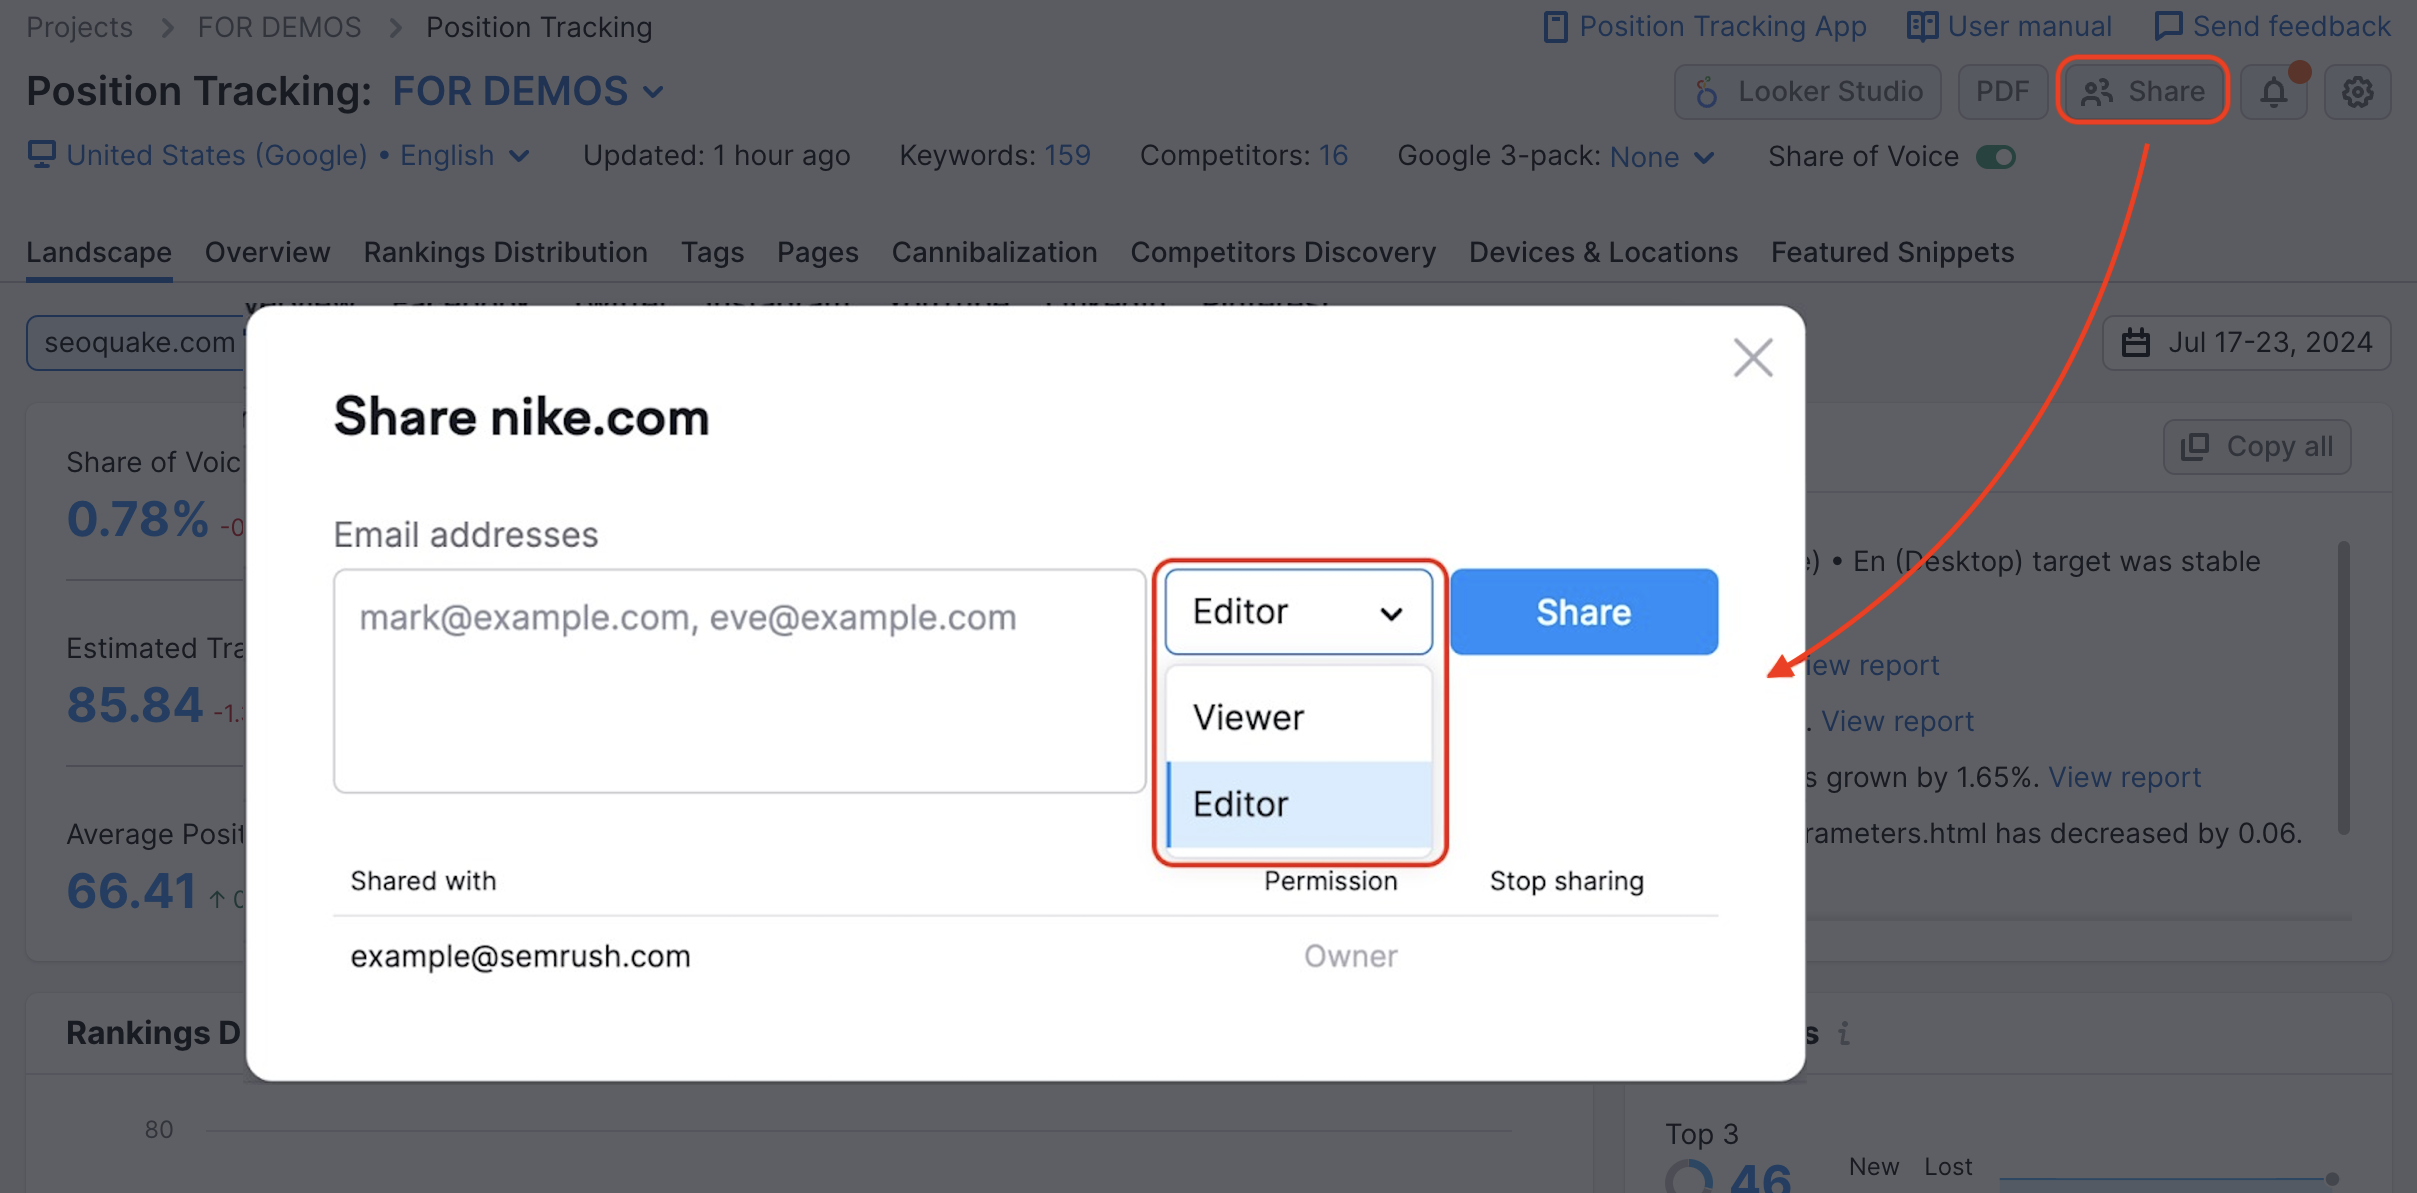 Pop-up screen when sharing a project from Position Tracking that opens after clicking the Share button. The drop-down menu shows viewer and editor options.